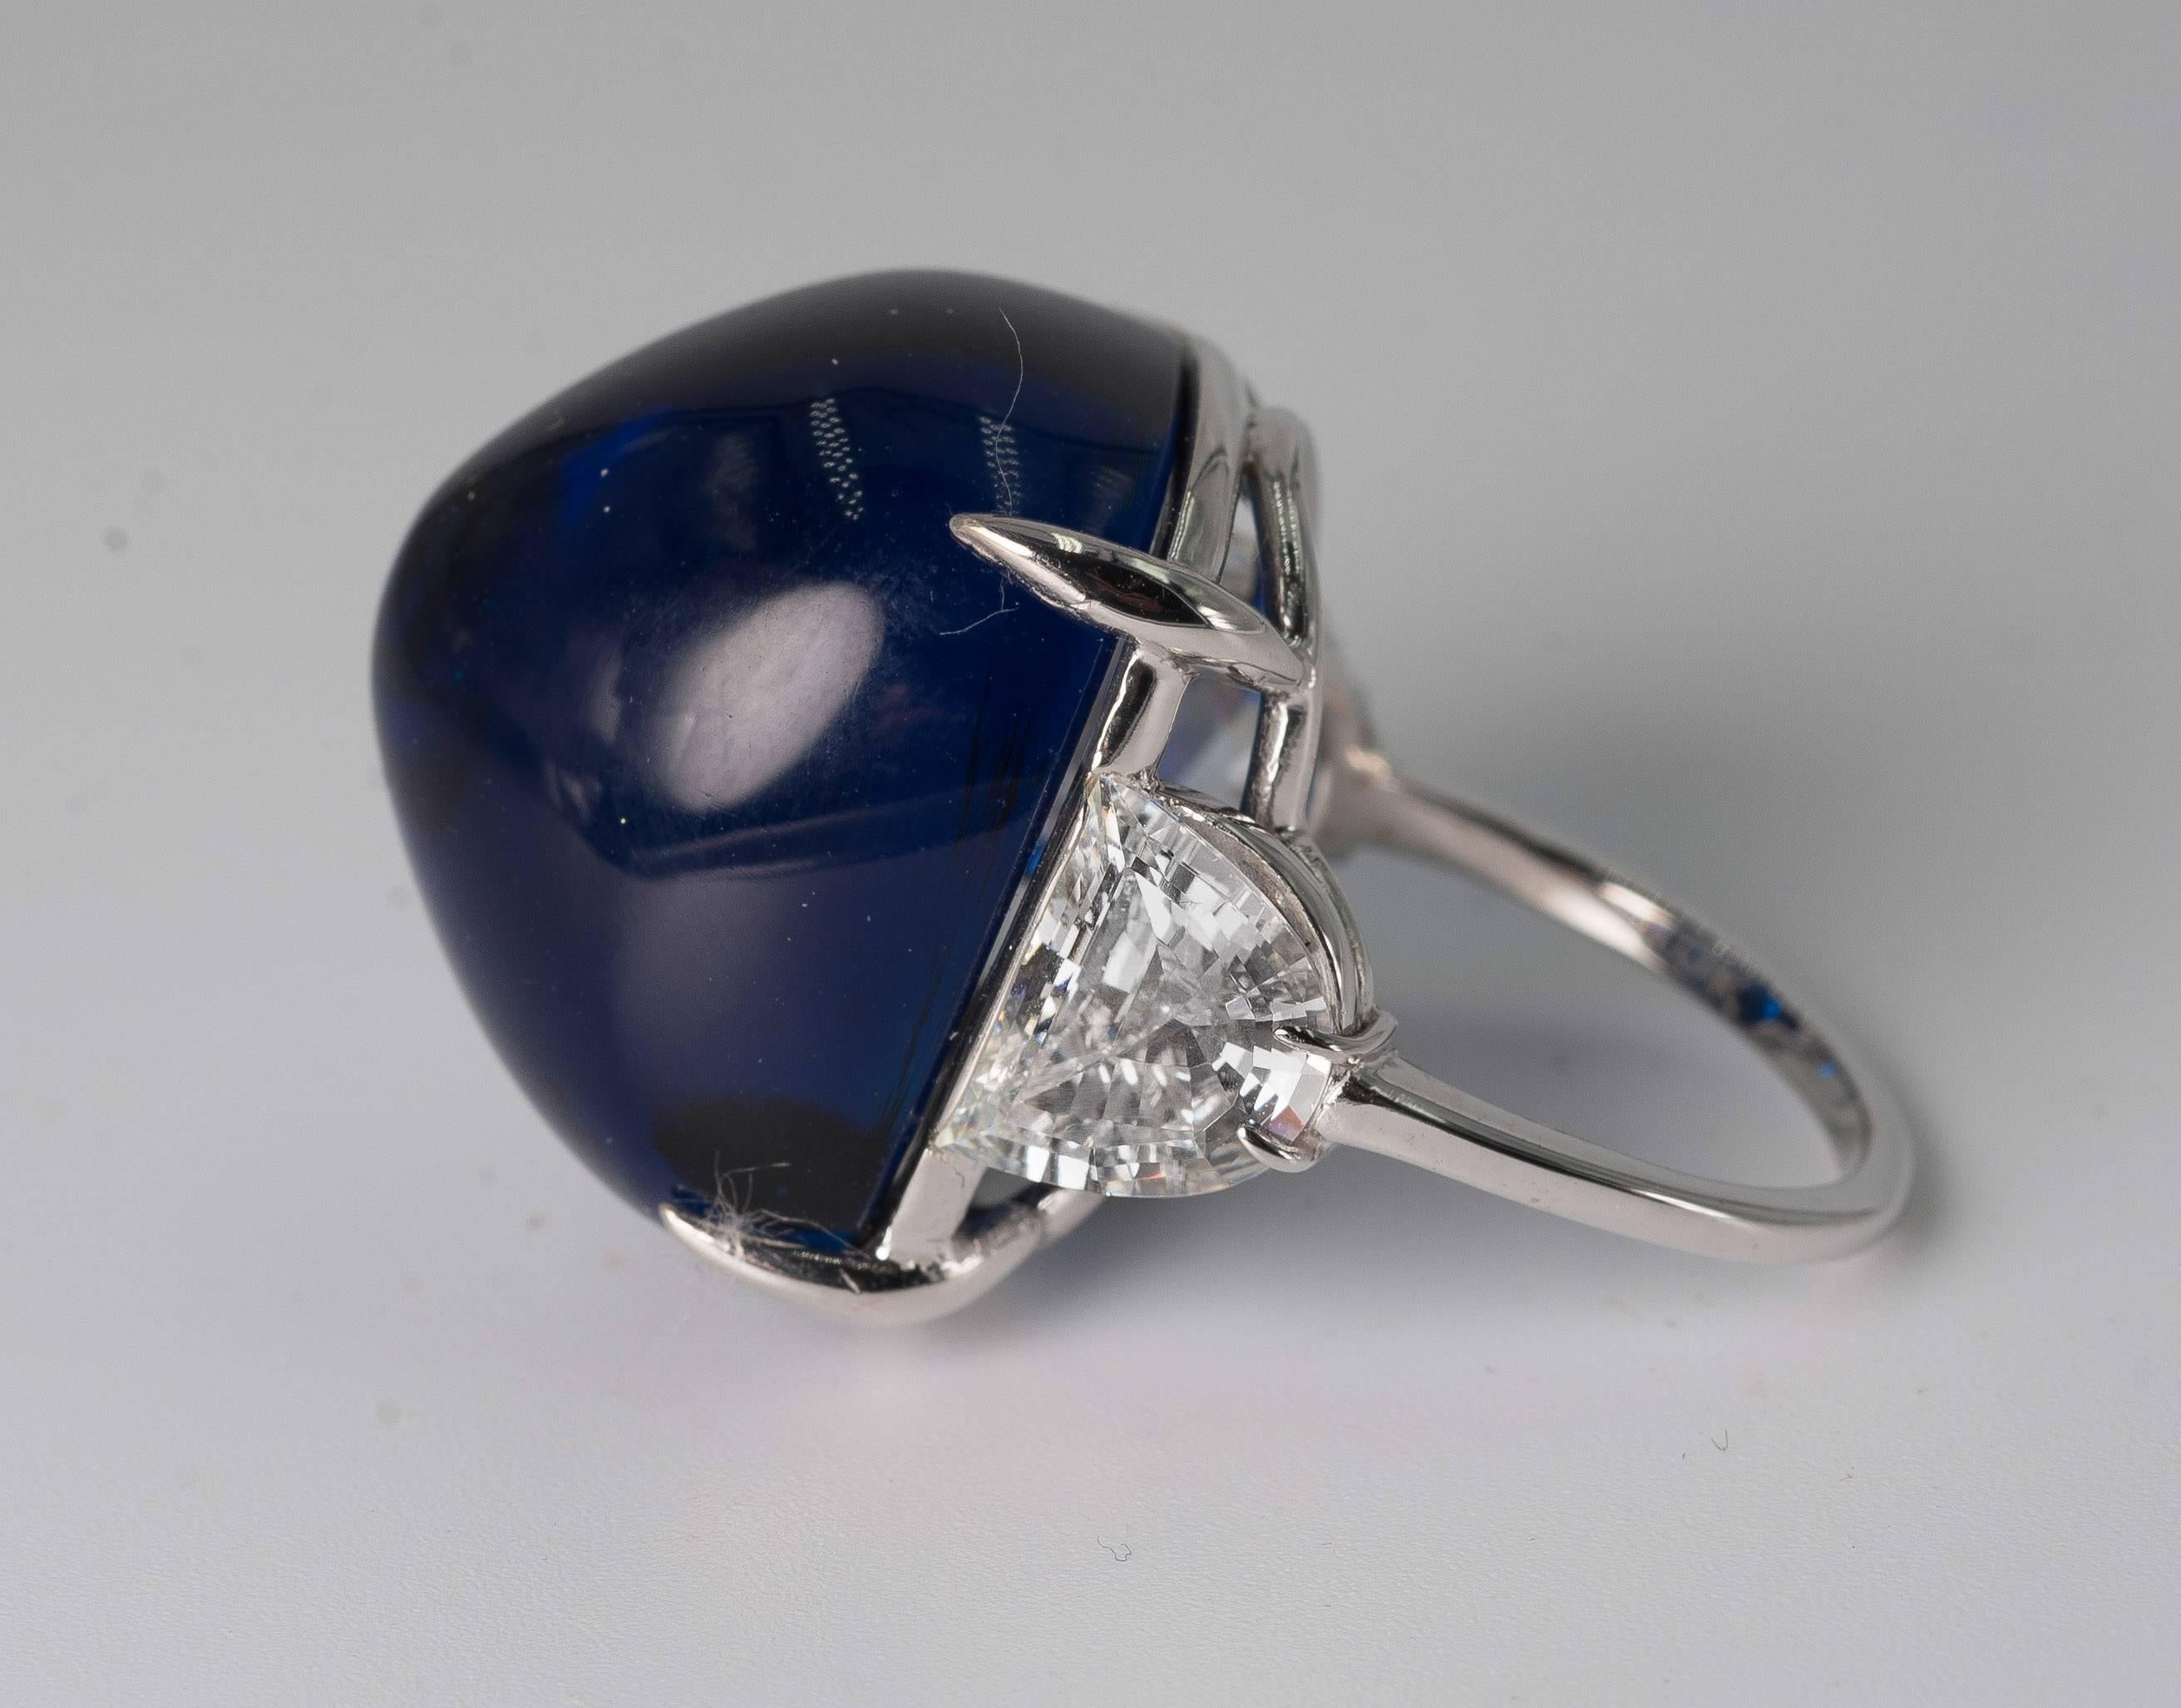 Superb faux French pyramid-cut cabochon Royal Kashmir Blue sapphire half-moon cubic zircon set white gold ring. The faux man-made sapphire has the look of about 40 carats and the side stones about two carat diamond weight each. Faux sapphire